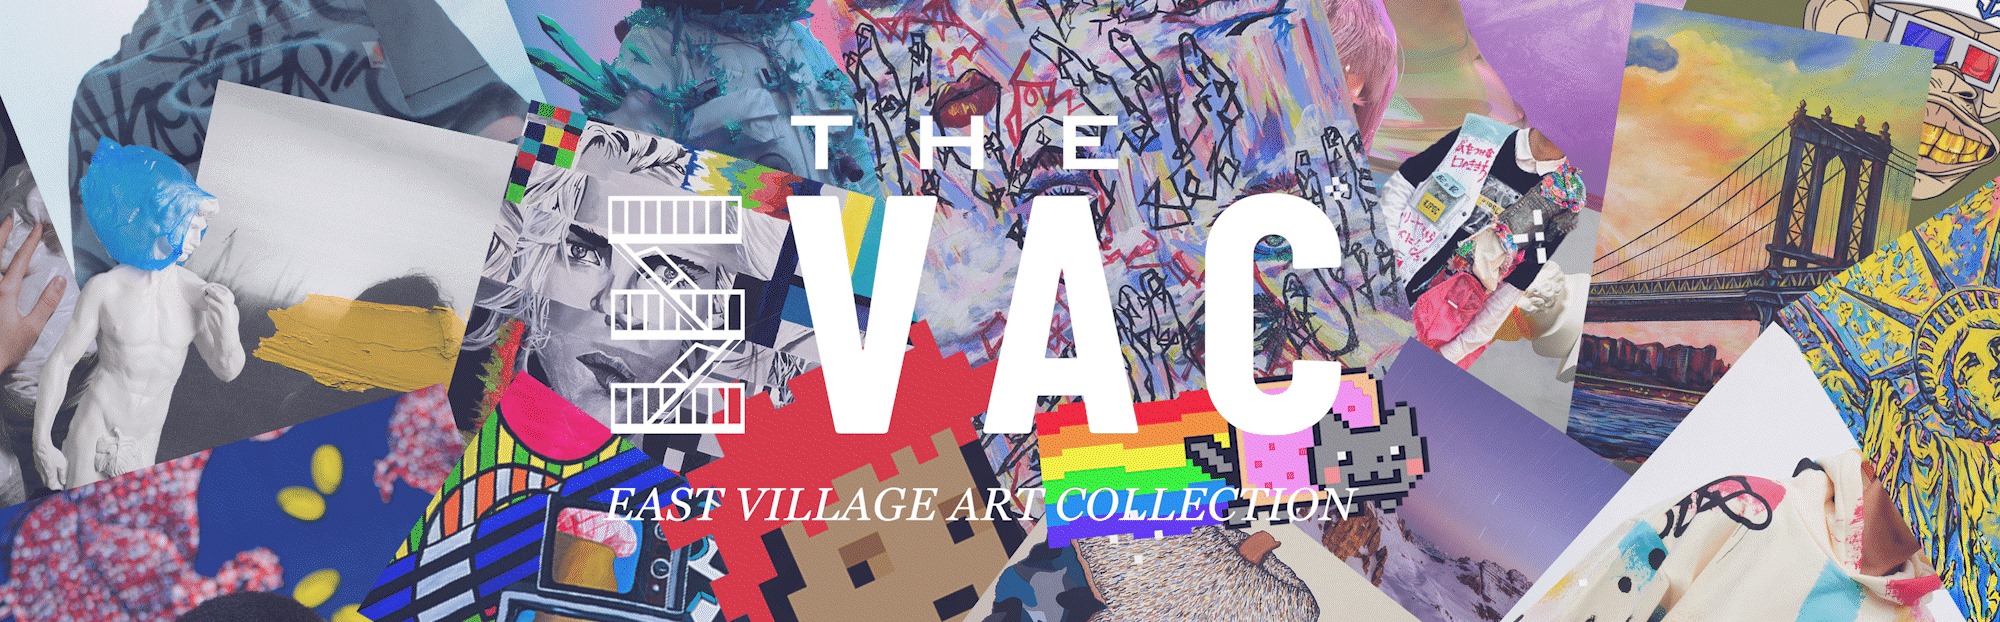 East Village Art Collection